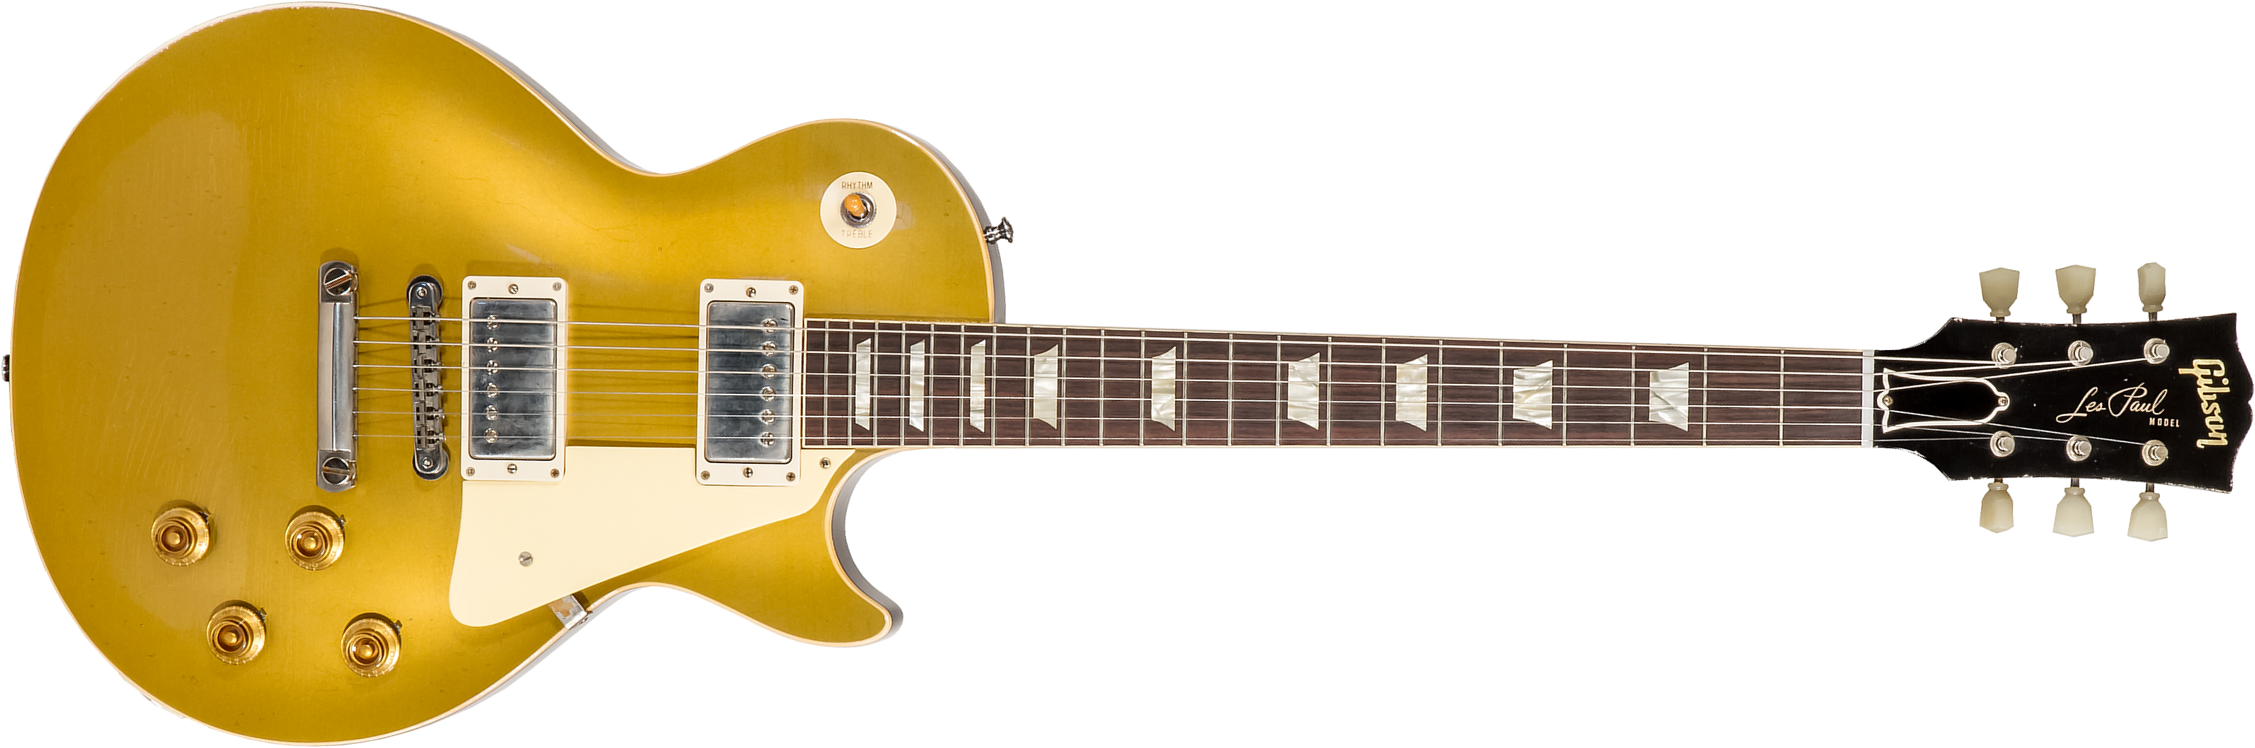 Gibson Custom Shop Murphy Lab Les Paul Goldtop 1957 Reissue 2h Ht Rw #721287 - Light Aged Double Gold With Dark Back - Single cut electric guitar - Ma